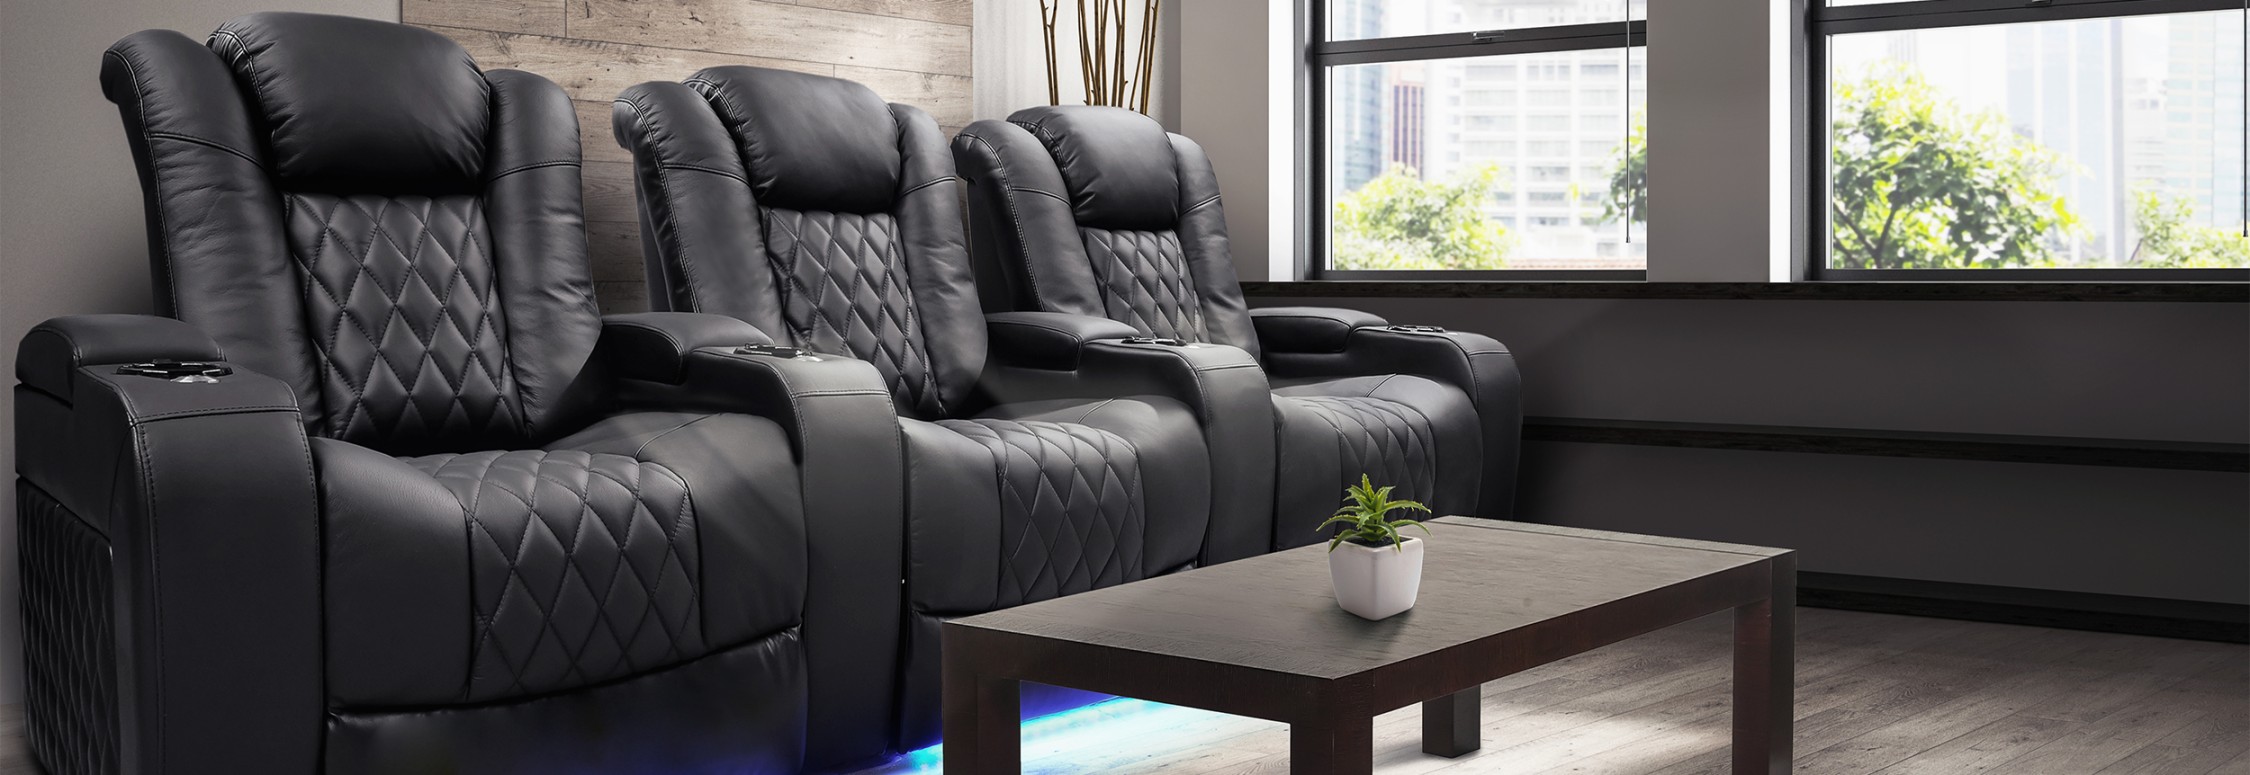 Welcome to the Best Option for Home Theater Seating